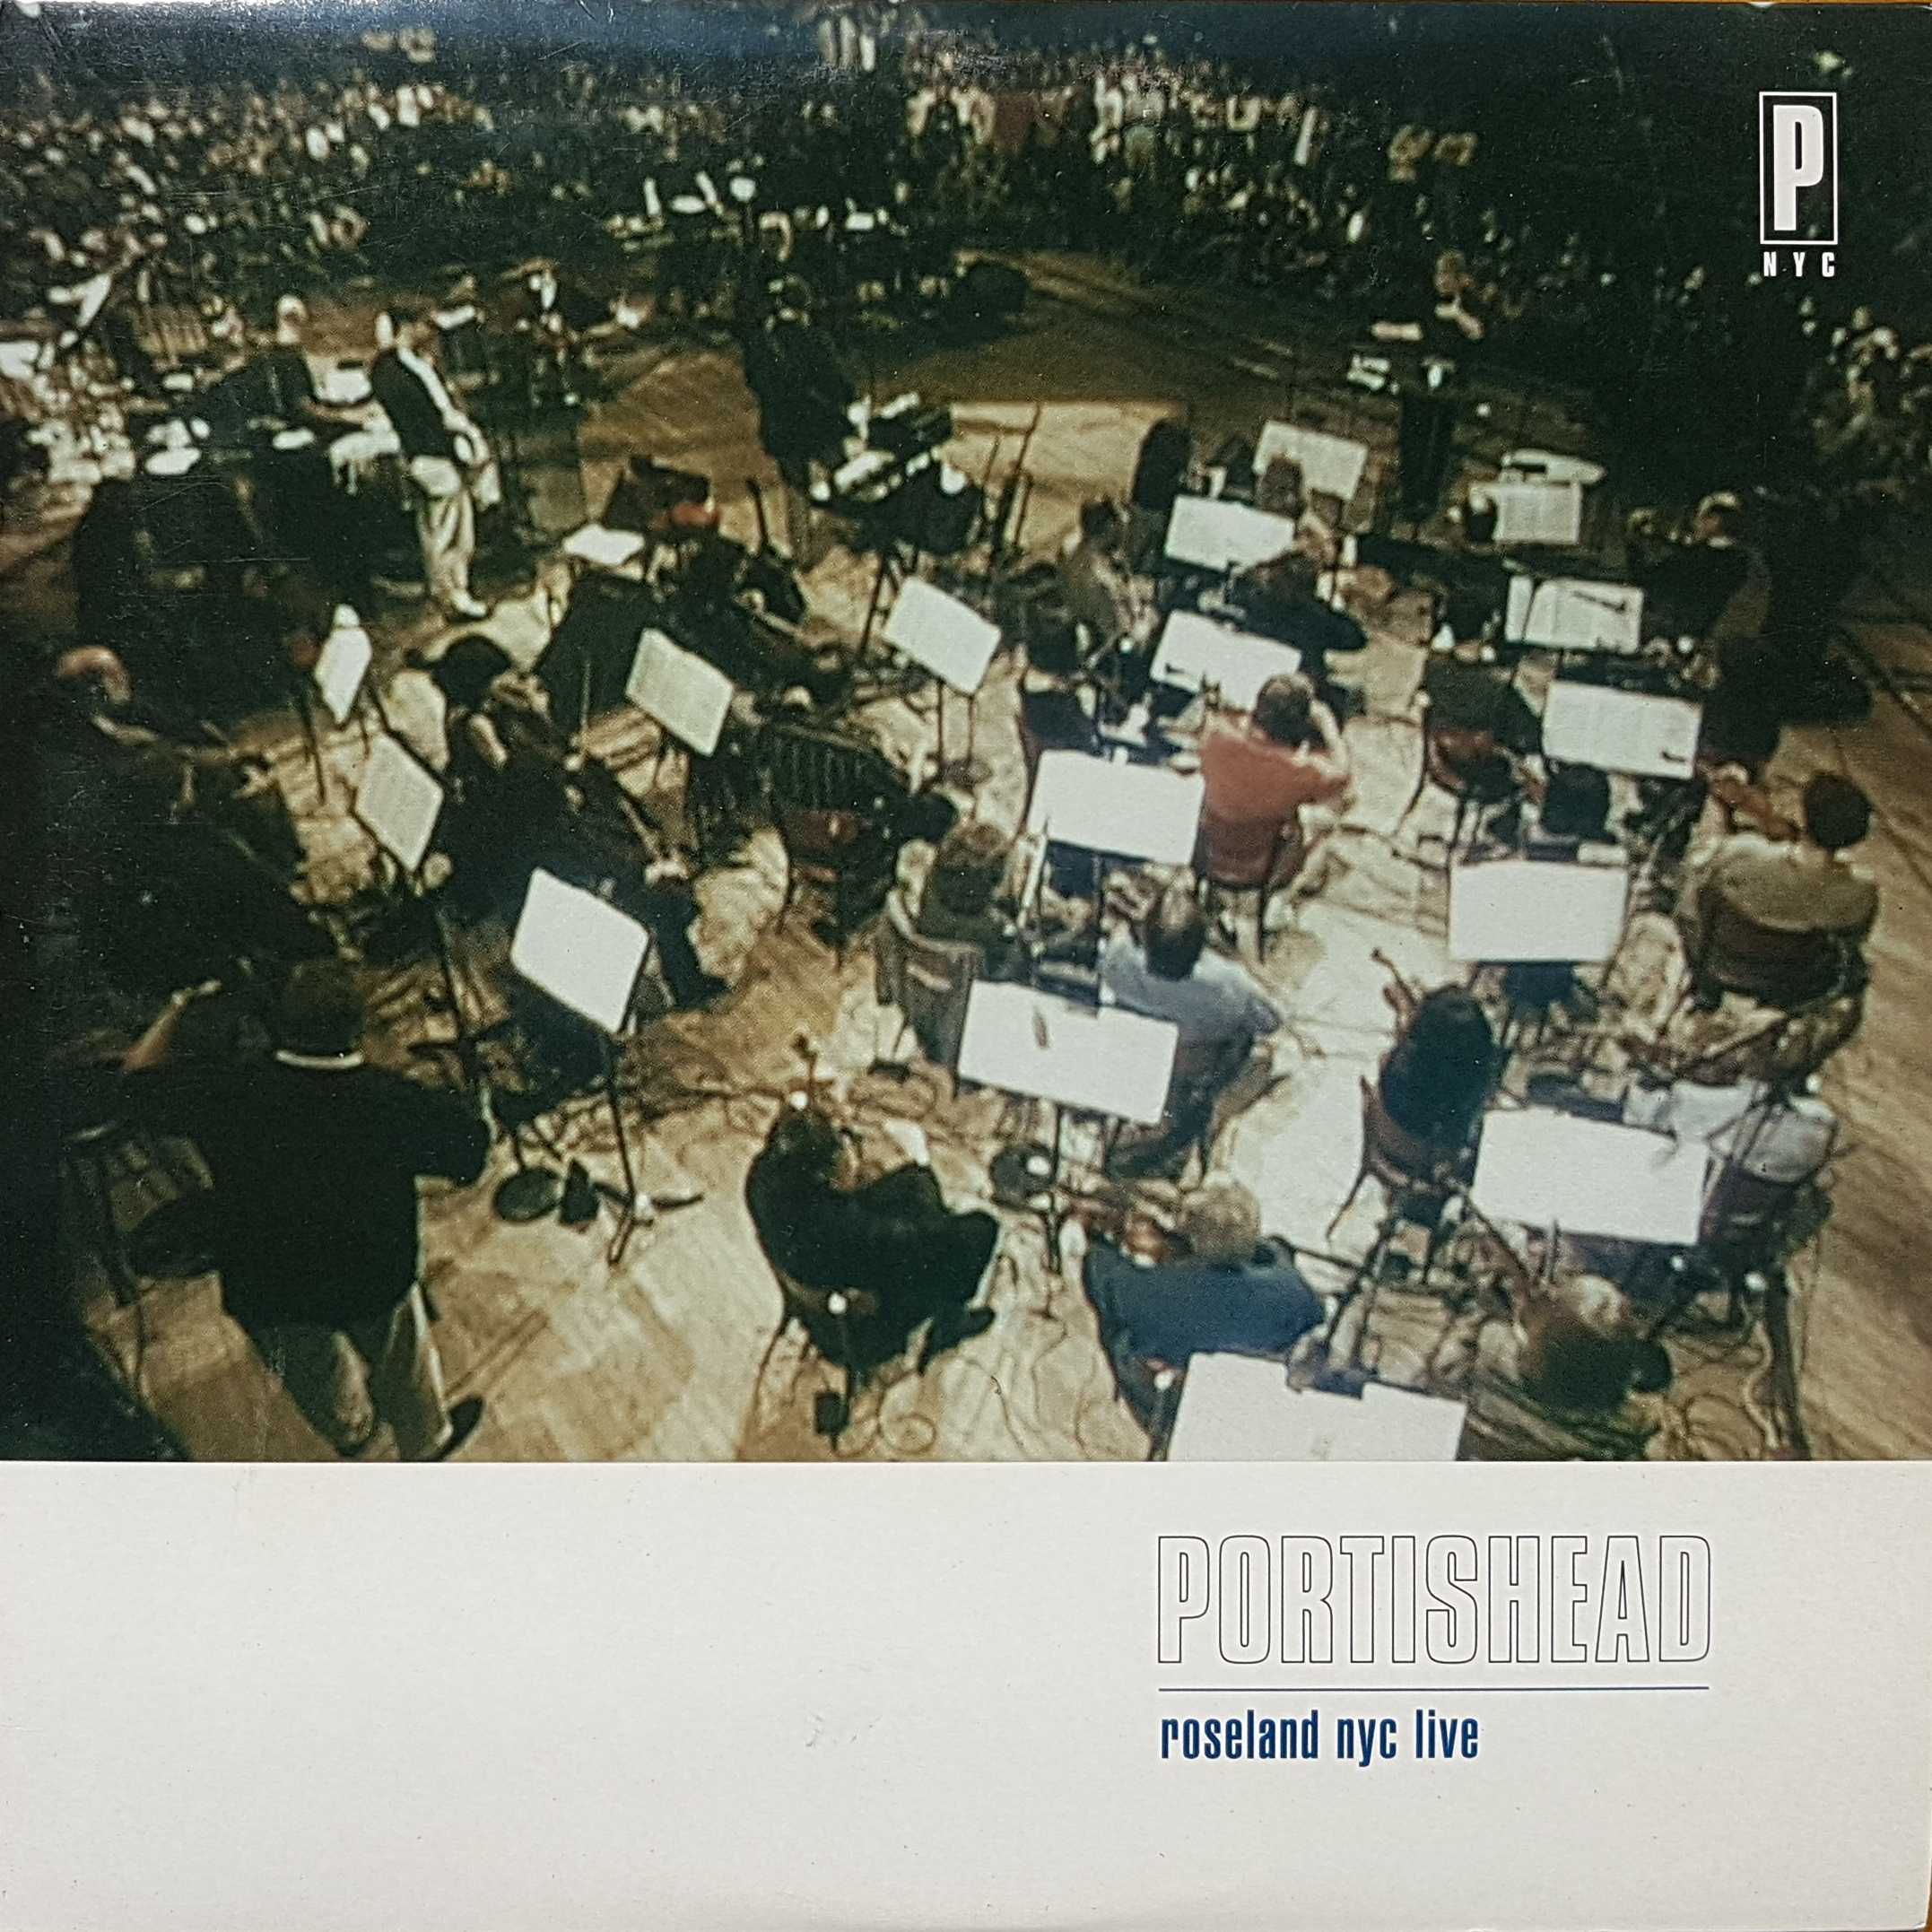 Picture of 559424 - 1 Roseland NYC - Live by artist Portishead  